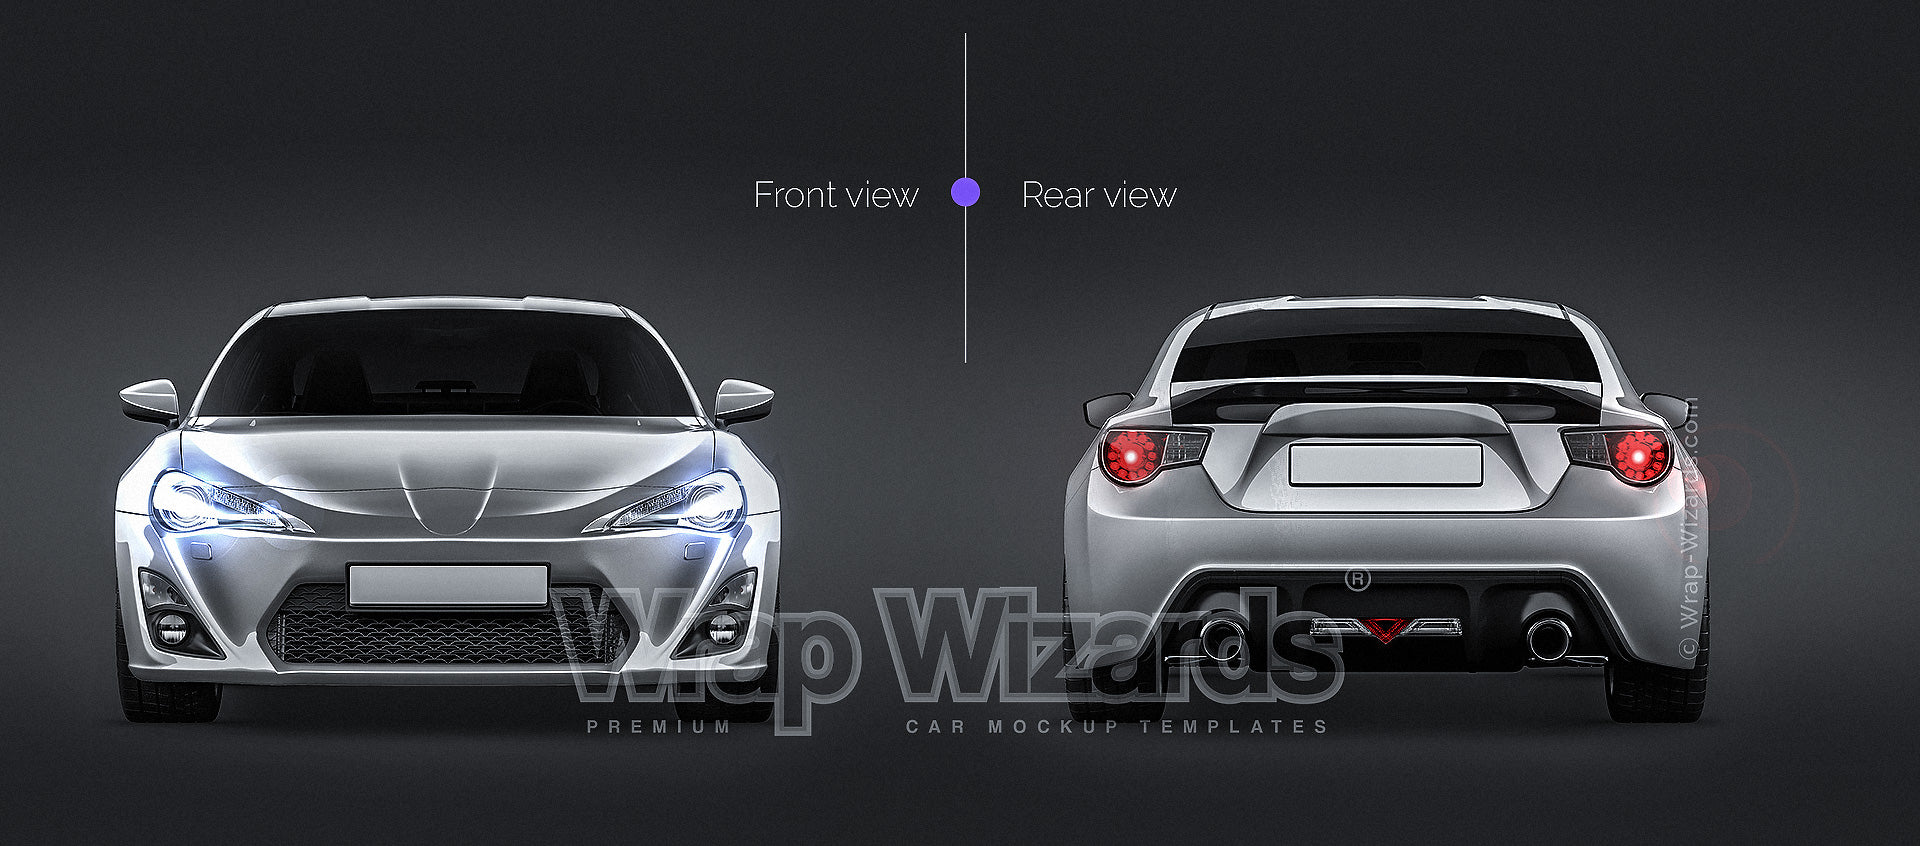 Toyota GT86 glossy finish - all sides Car Mockup Template.psd